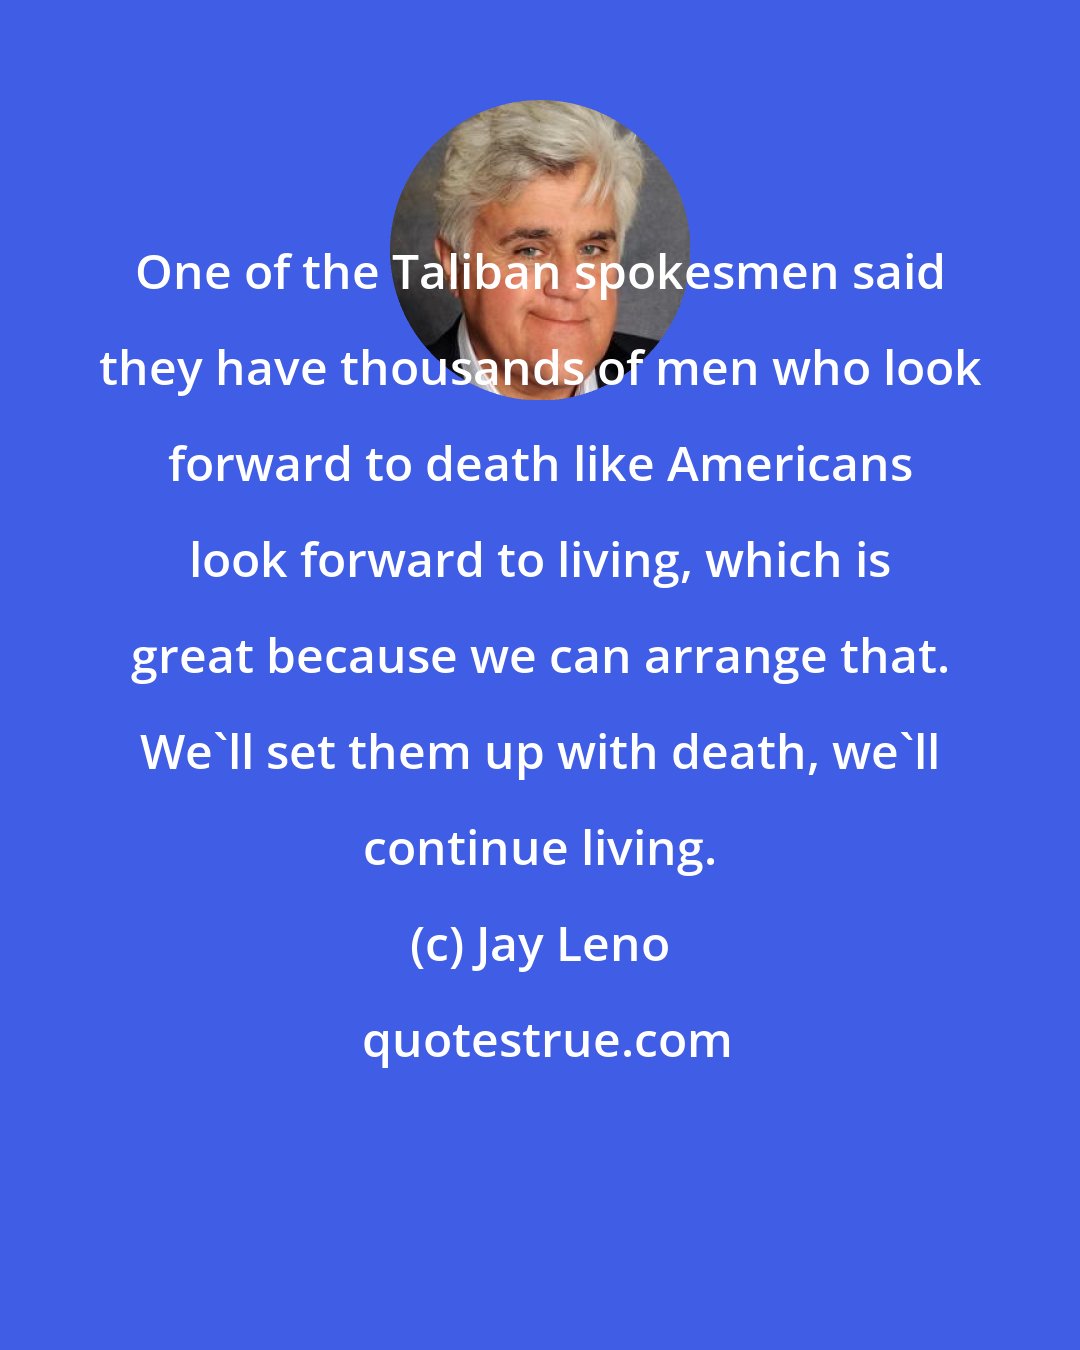 Jay Leno: One of the Taliban spokesmen said they have thousands of men who look forward to death like Americans look forward to living, which is great because we can arrange that. We'll set them up with death, we'll continue living.